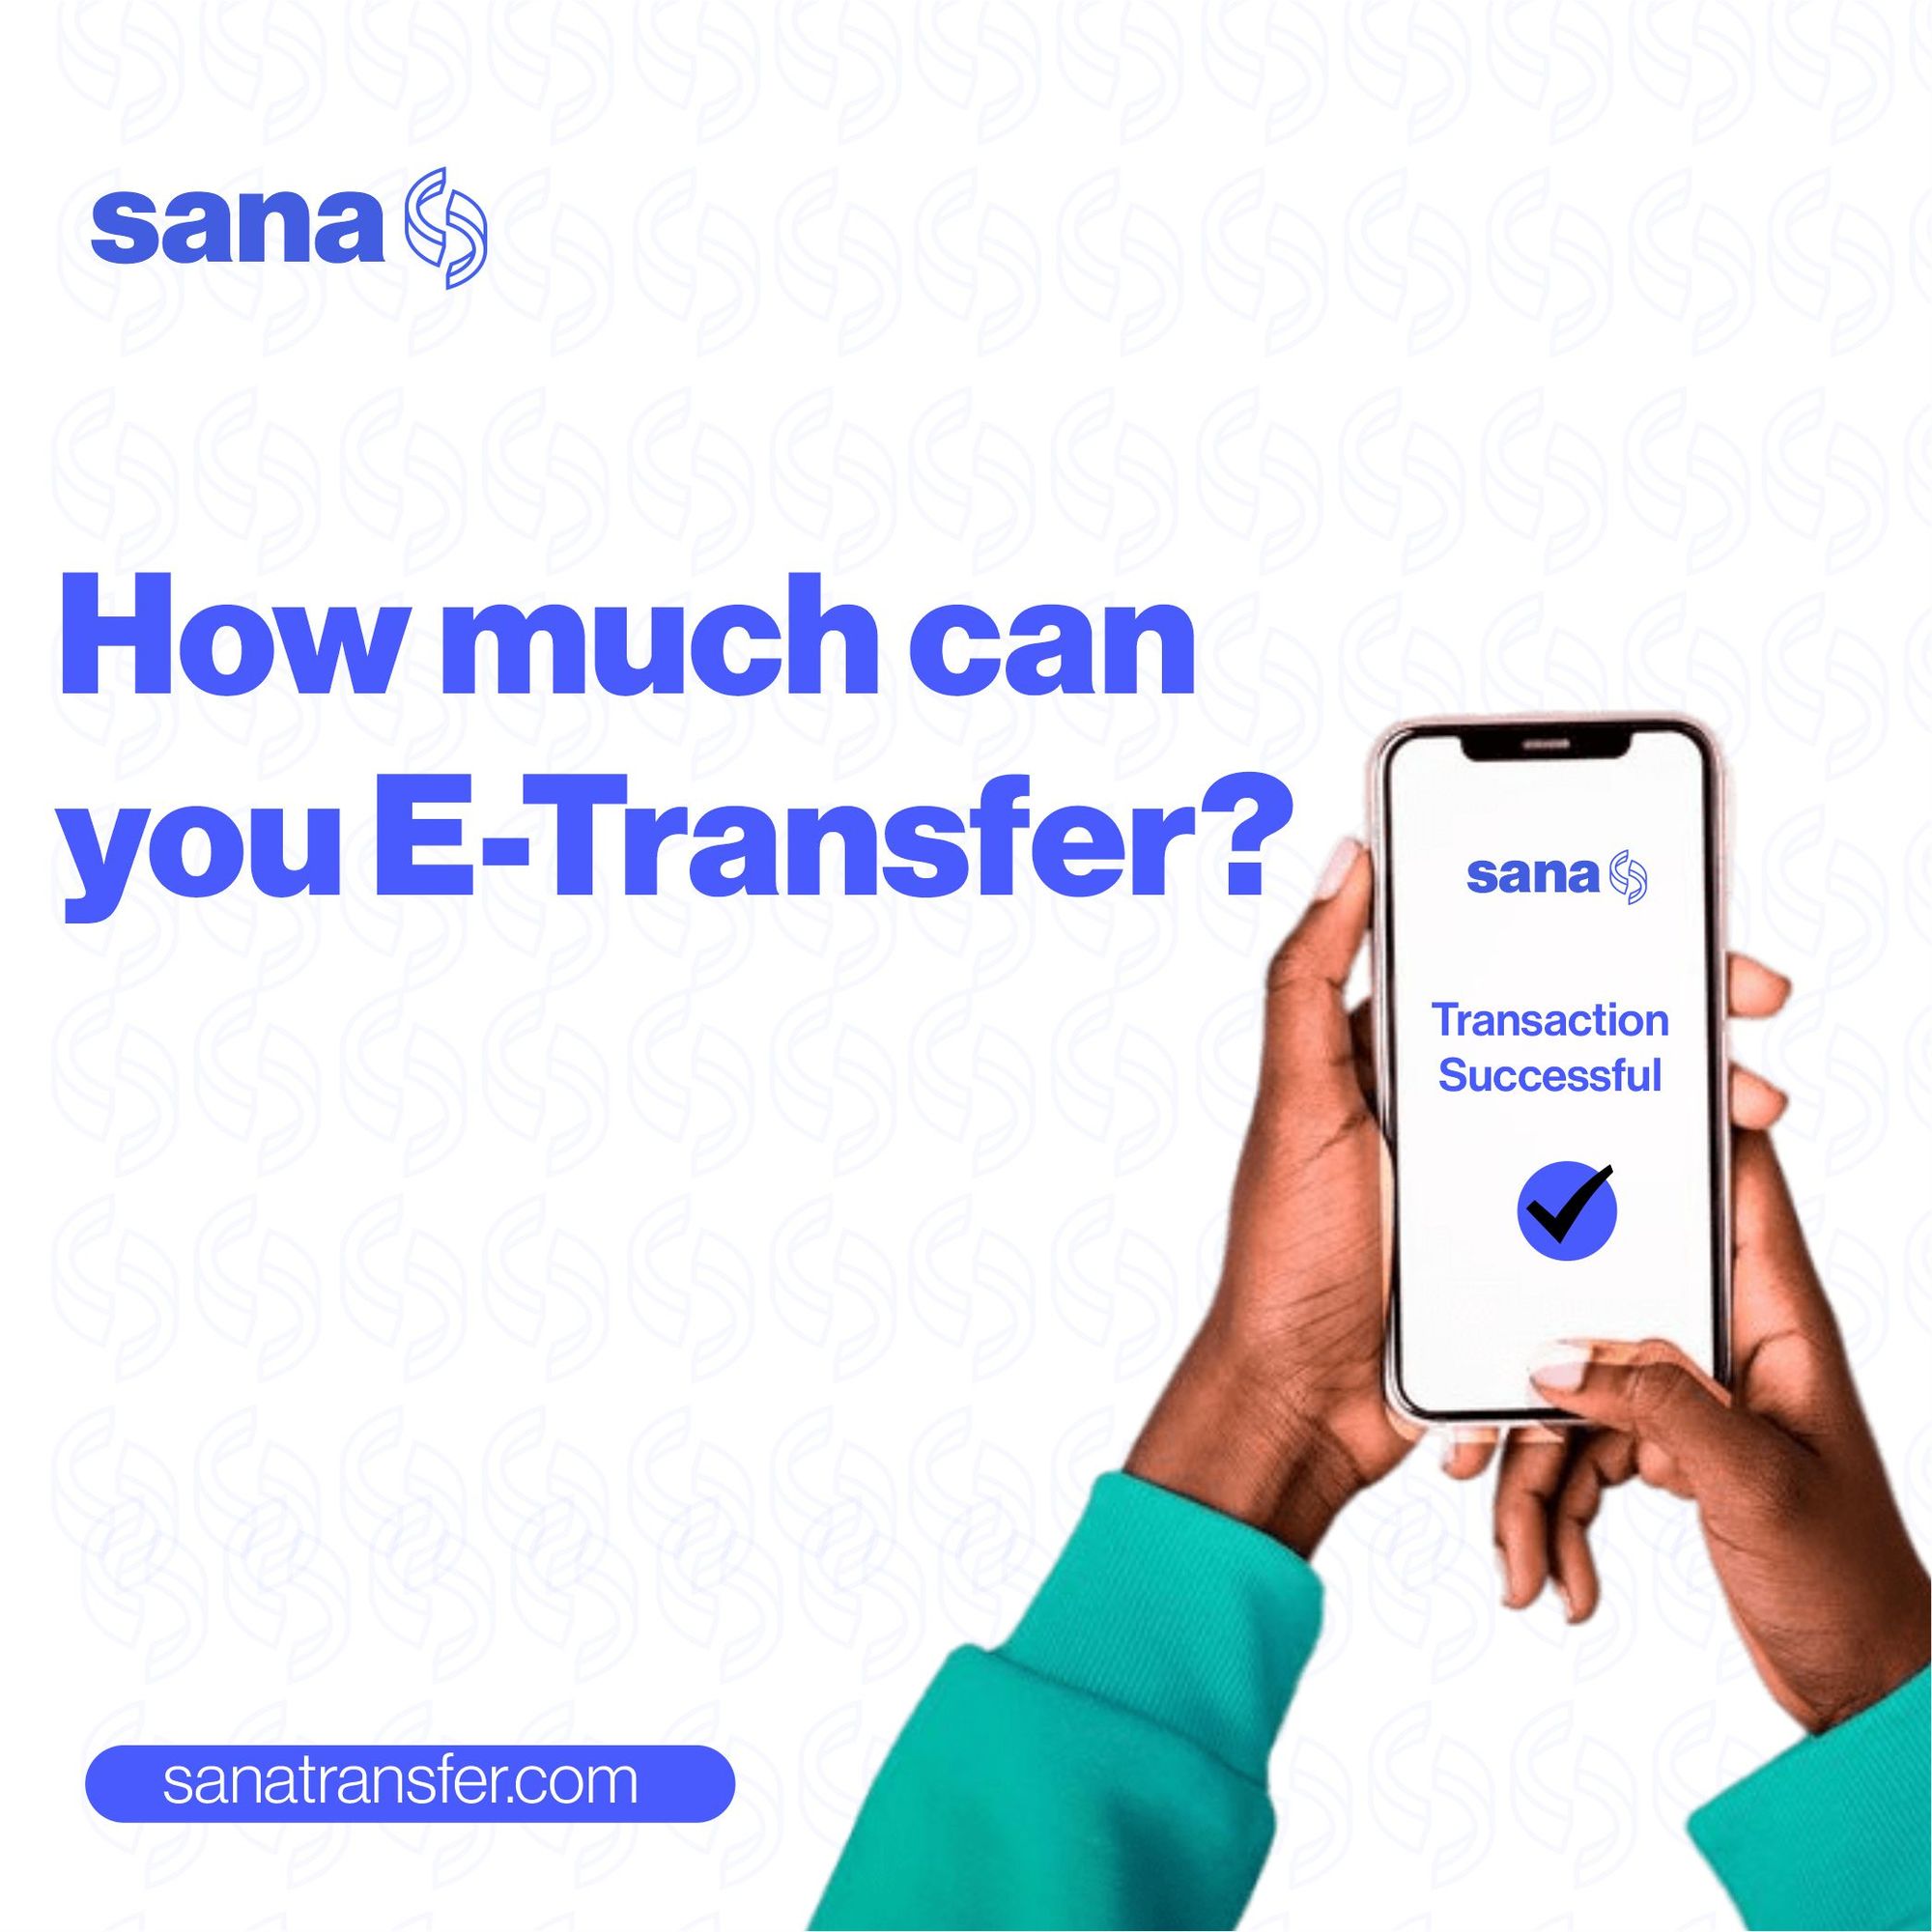 How much can you E-Transfer?